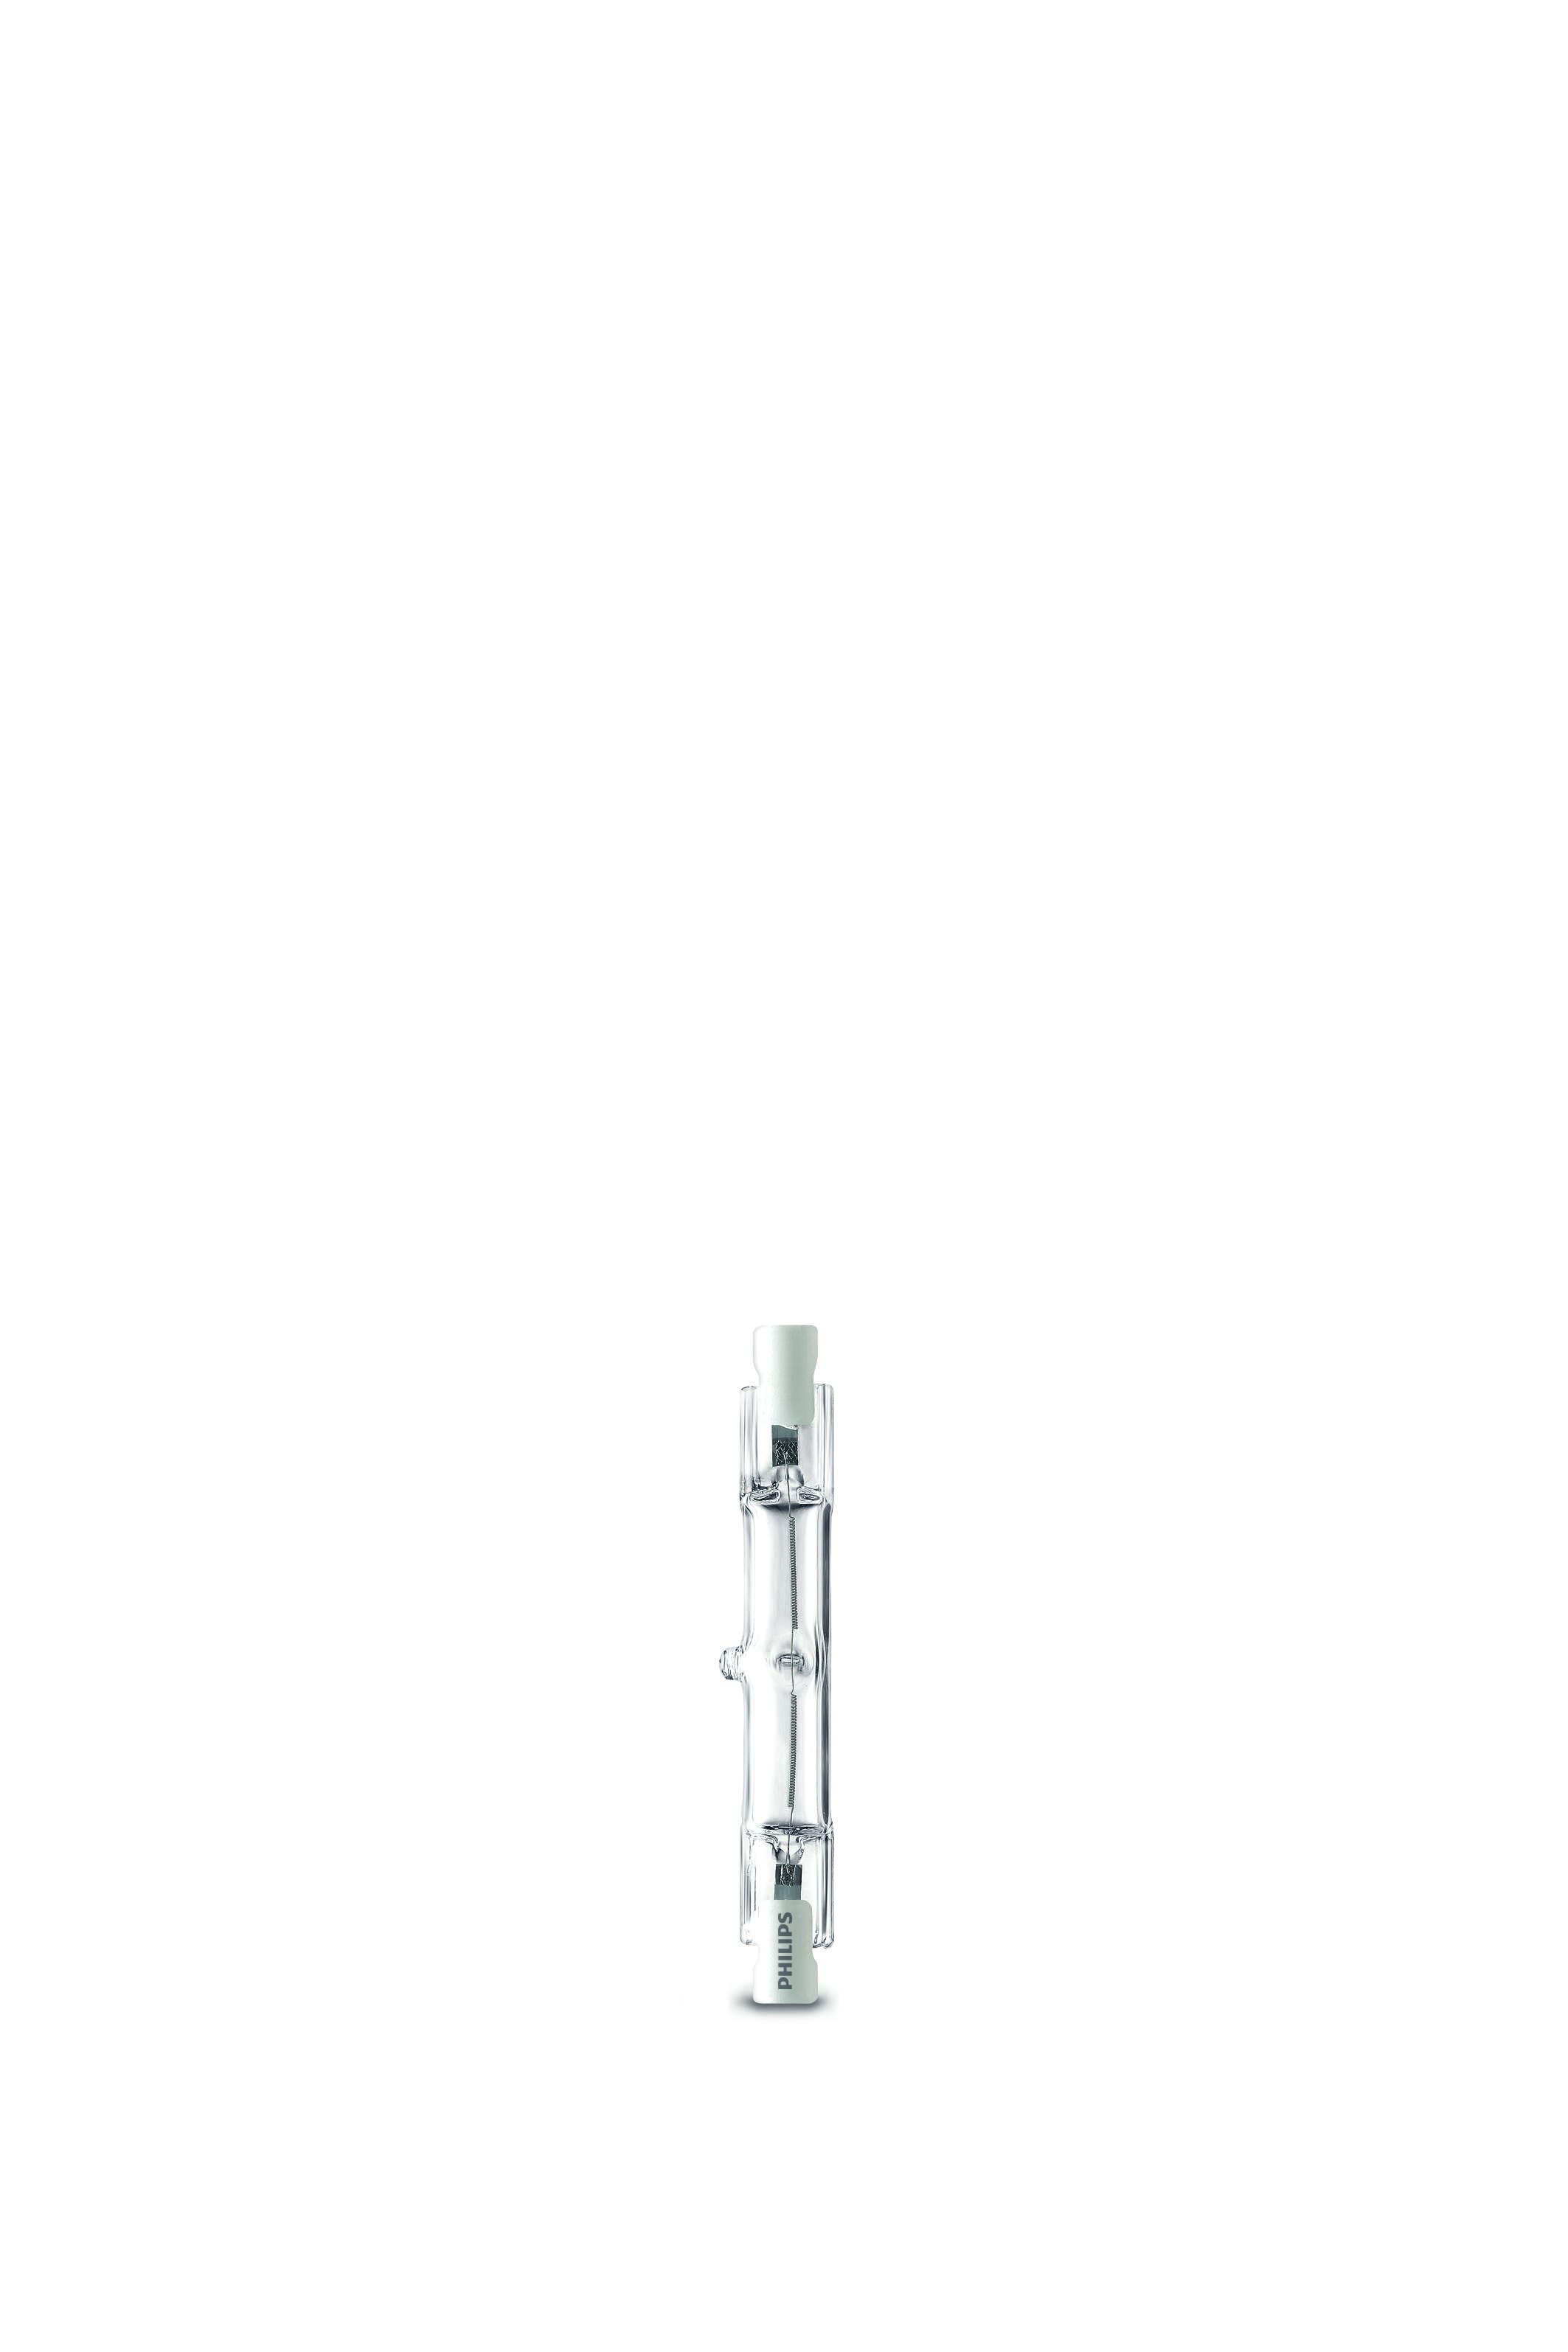 PHILIPS Halo Linear Halogen Stab R7s, 140.0 W, 3000 K, 2646 lm, 78 mm, dimmbar